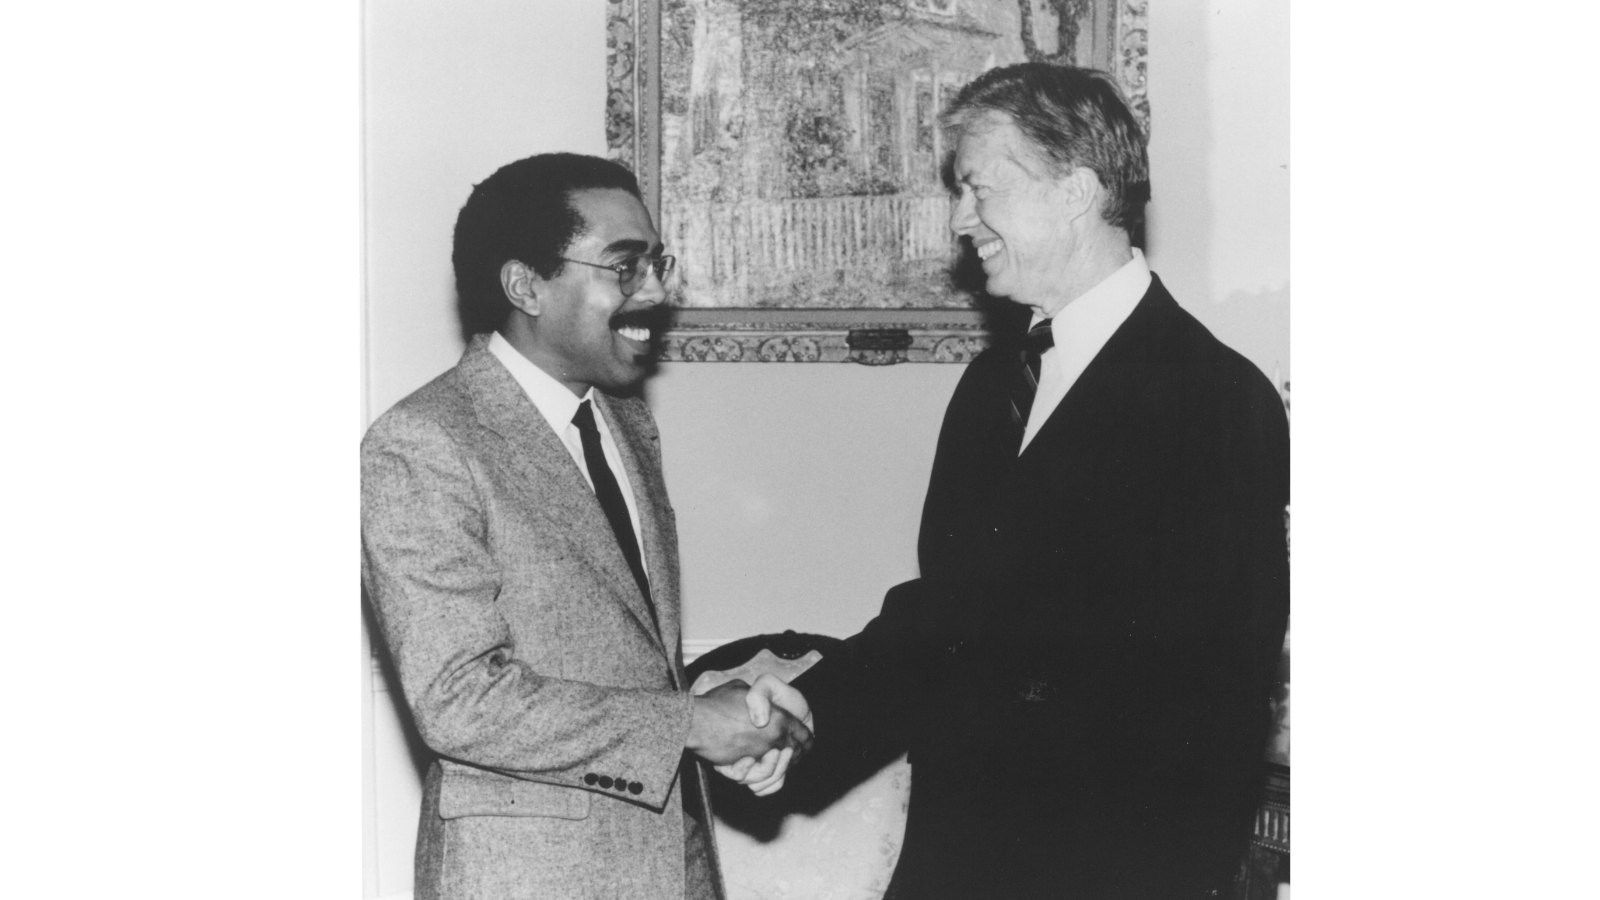 Walter Massey meets former President Jimmy Carter. (Image by Argonne National Laboratory.)